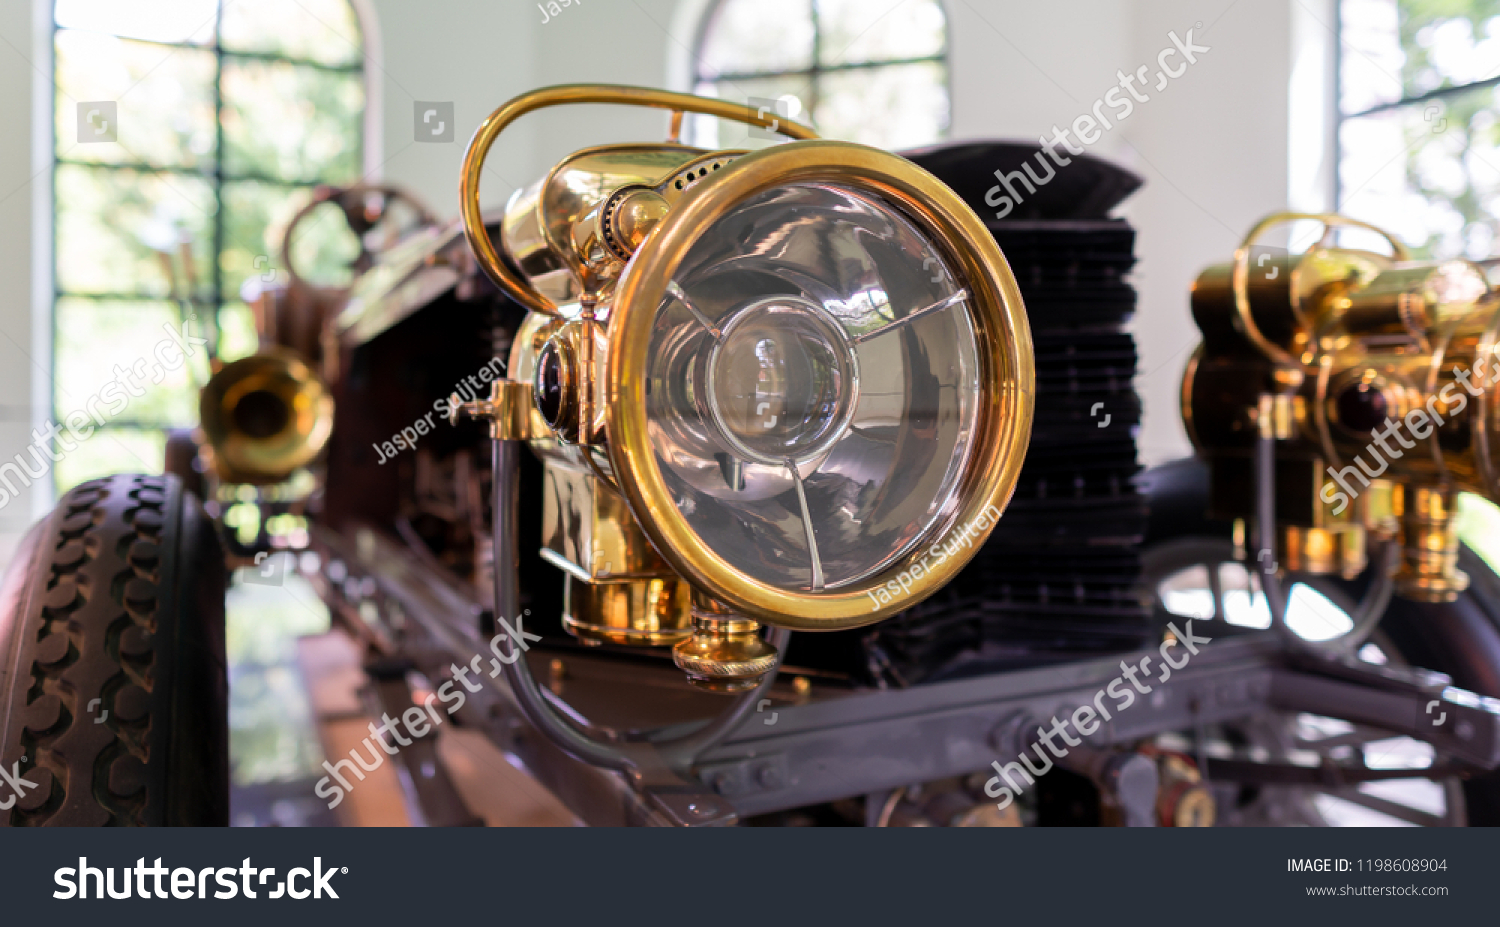 Vintage antique brass old timer car headlight. Auto head lamp. Shallow depth of field. Close up of vintage vehicle head light. #1198608904